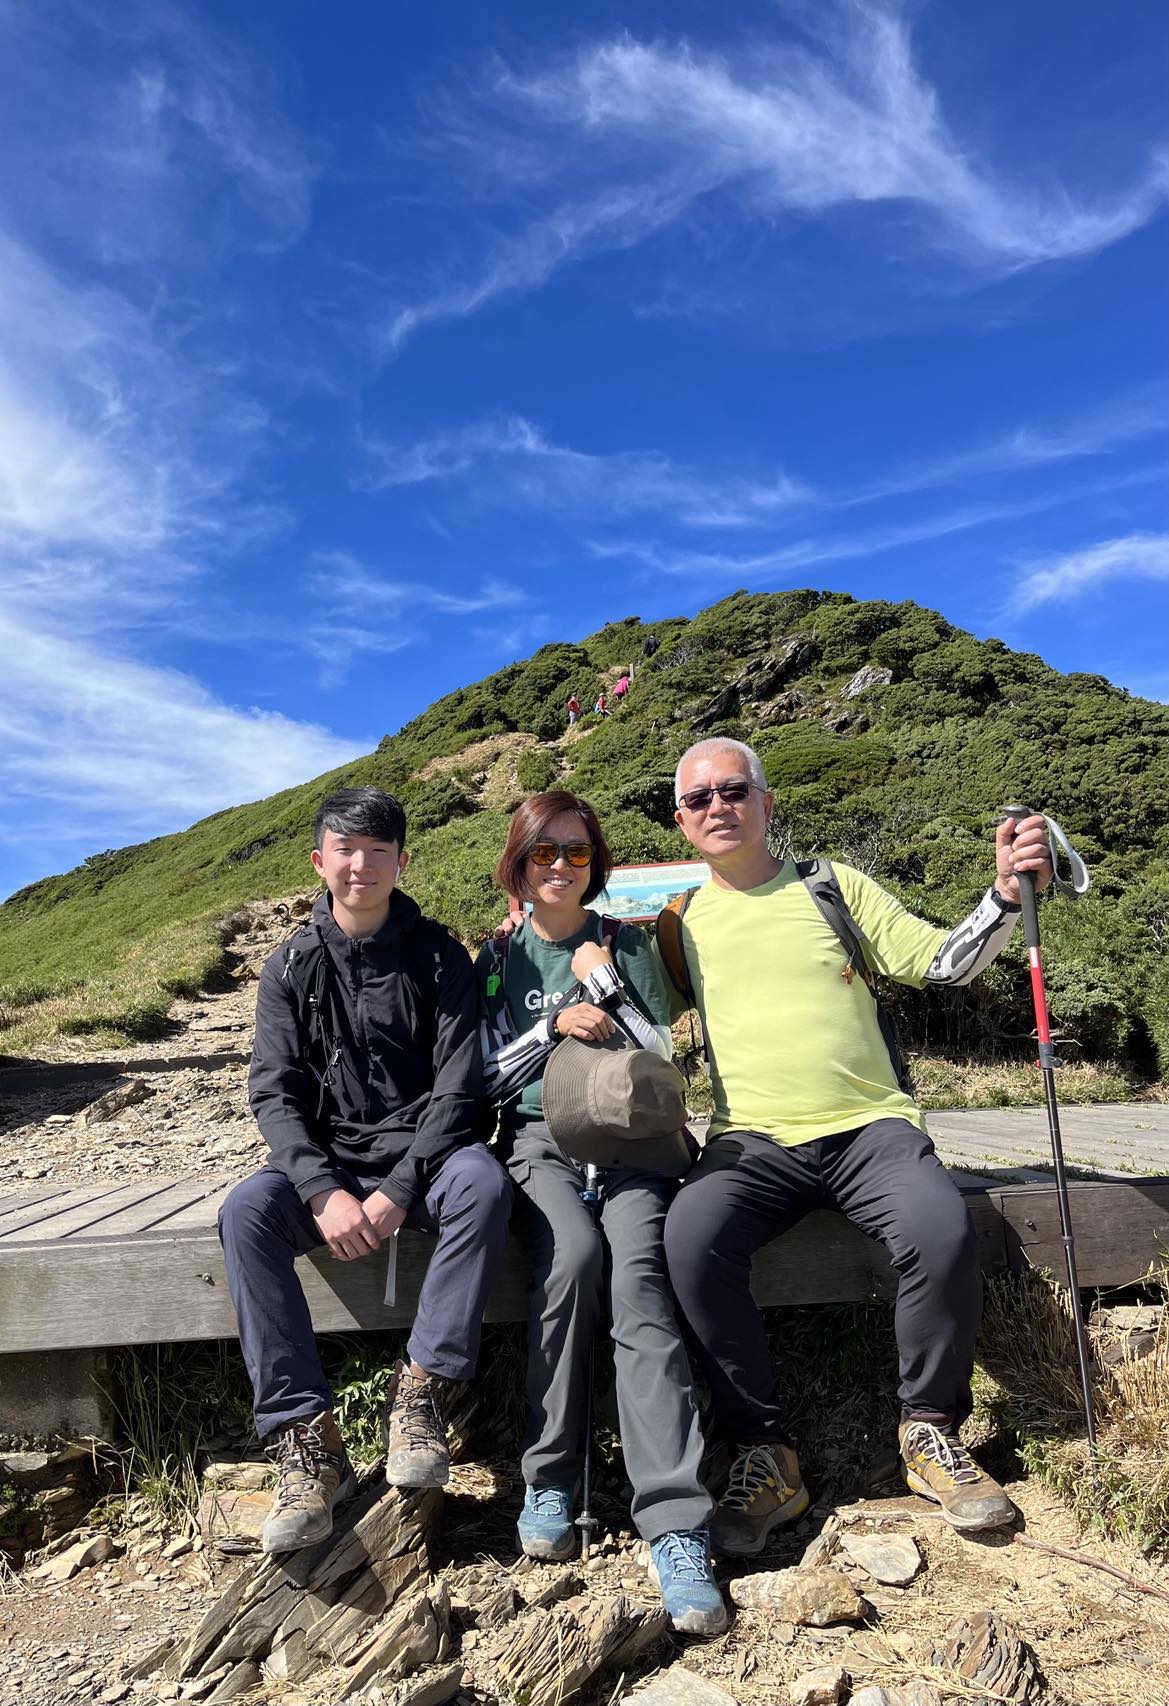 Kris with his wife and son hiking